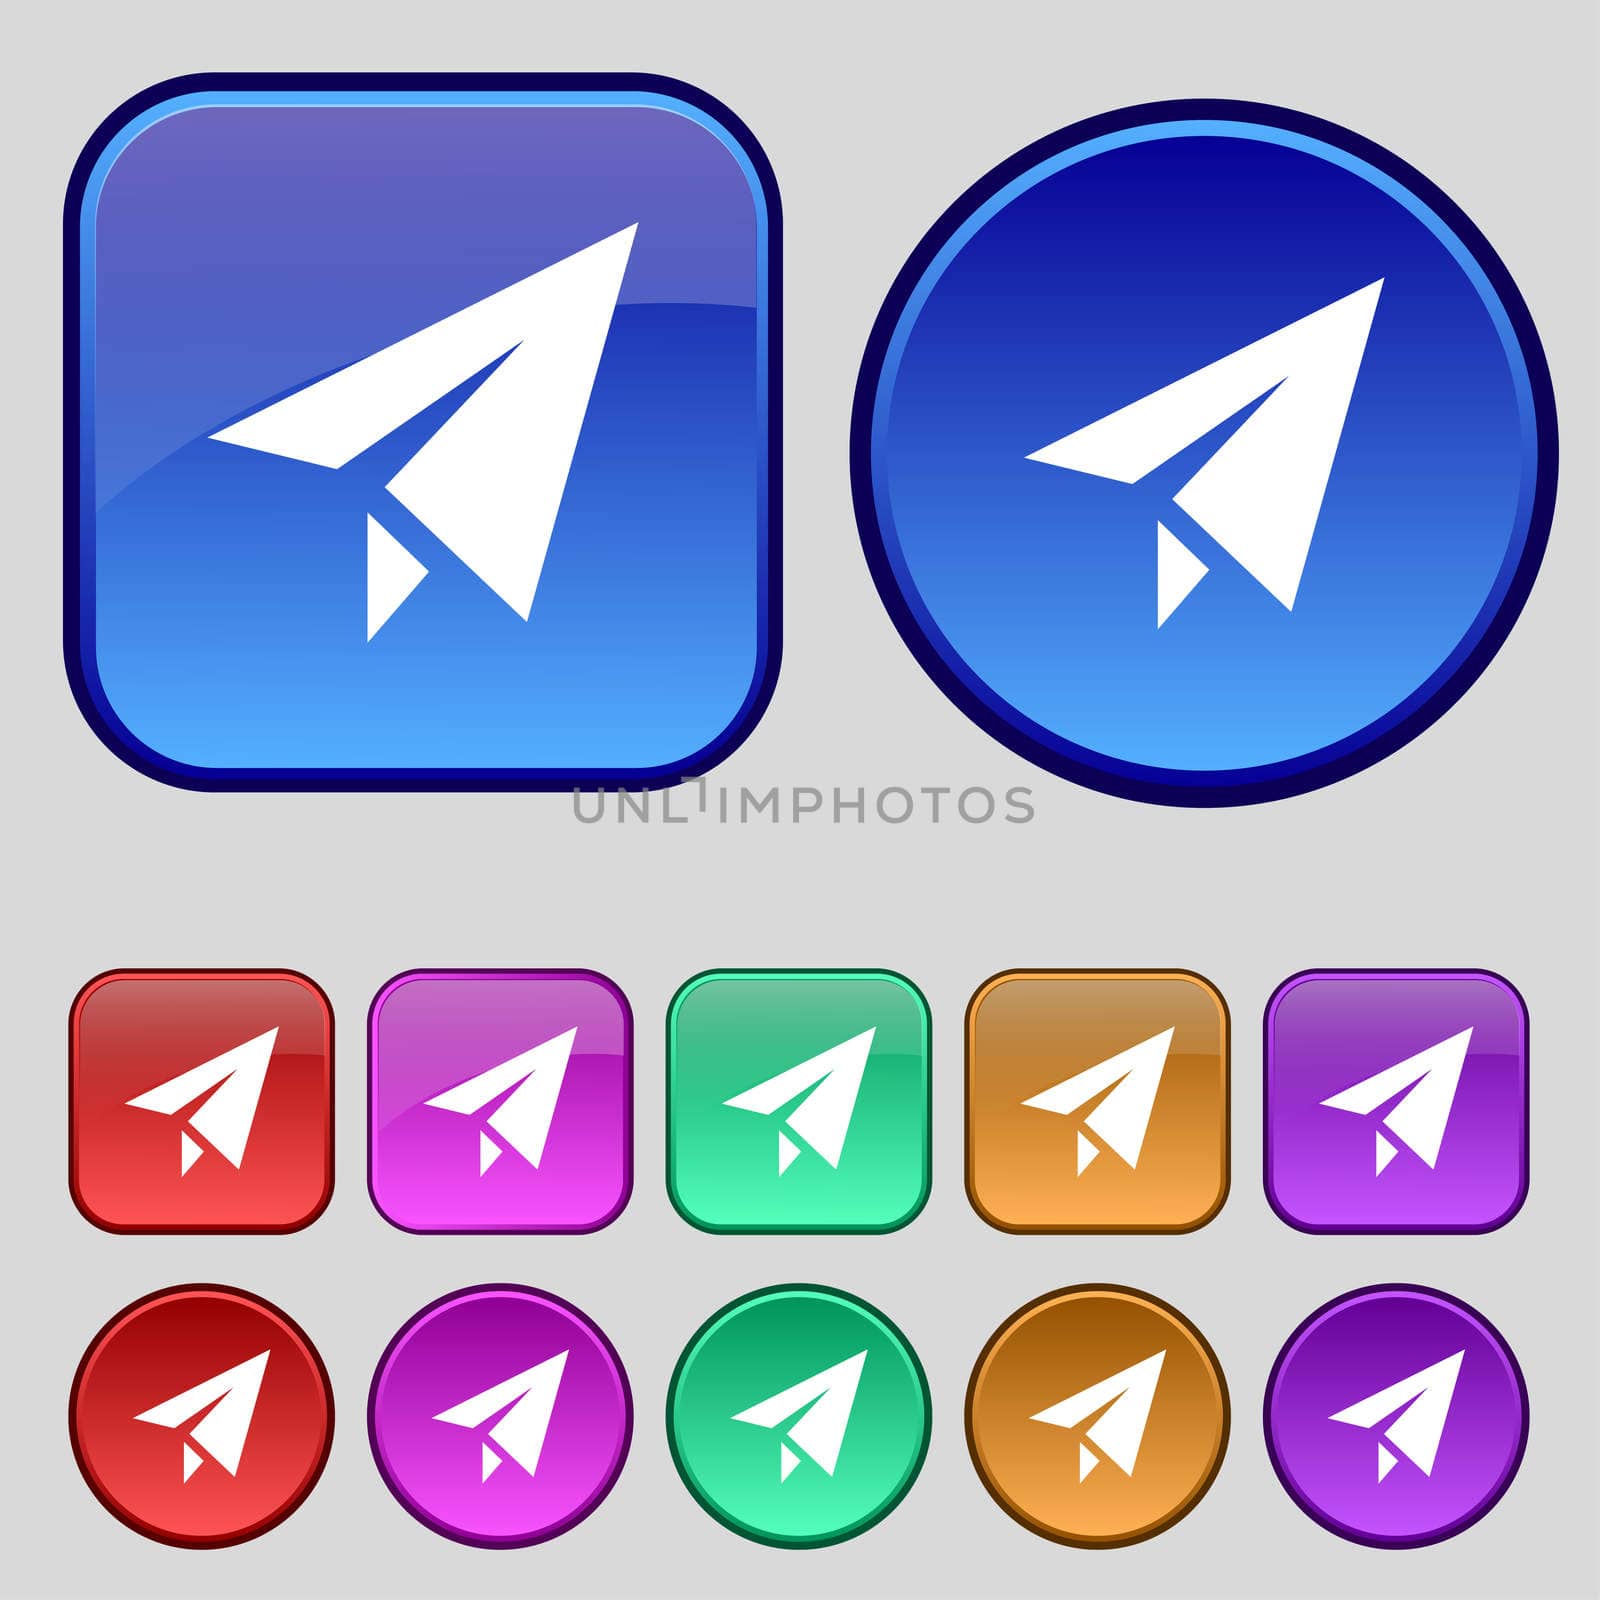 Paper airplane icon sign. A set of twelve vintage buttons for your design. illustration